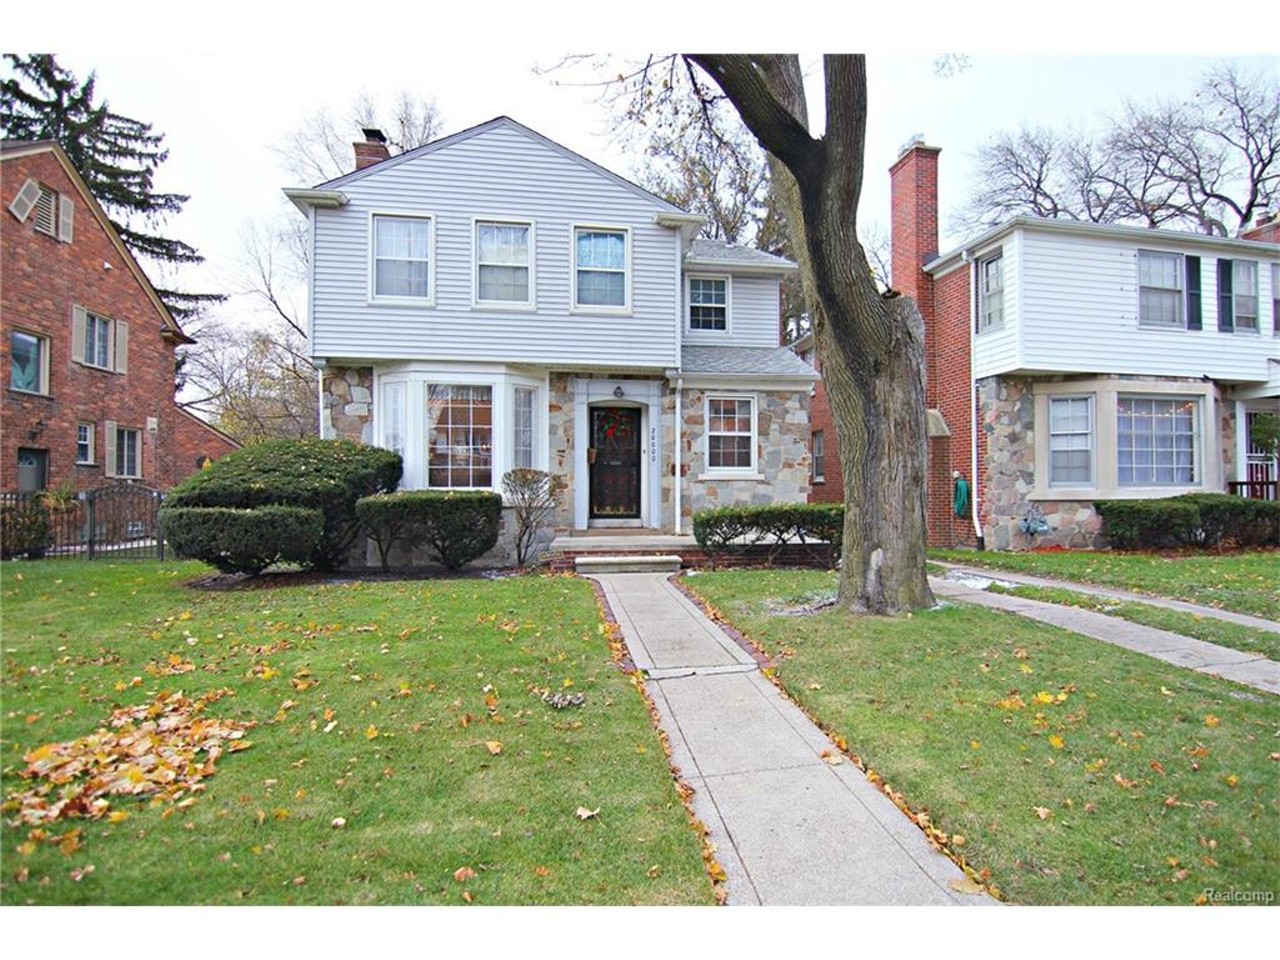 20000 Shewsbury Rd, Detroit
$170,000; 4 beds, 2.1 baths
This home has 4 bedrooms so it's perfect for a larger family. The kitchen has great appliances, and the big windows bring in some great natural sunlight to the space.